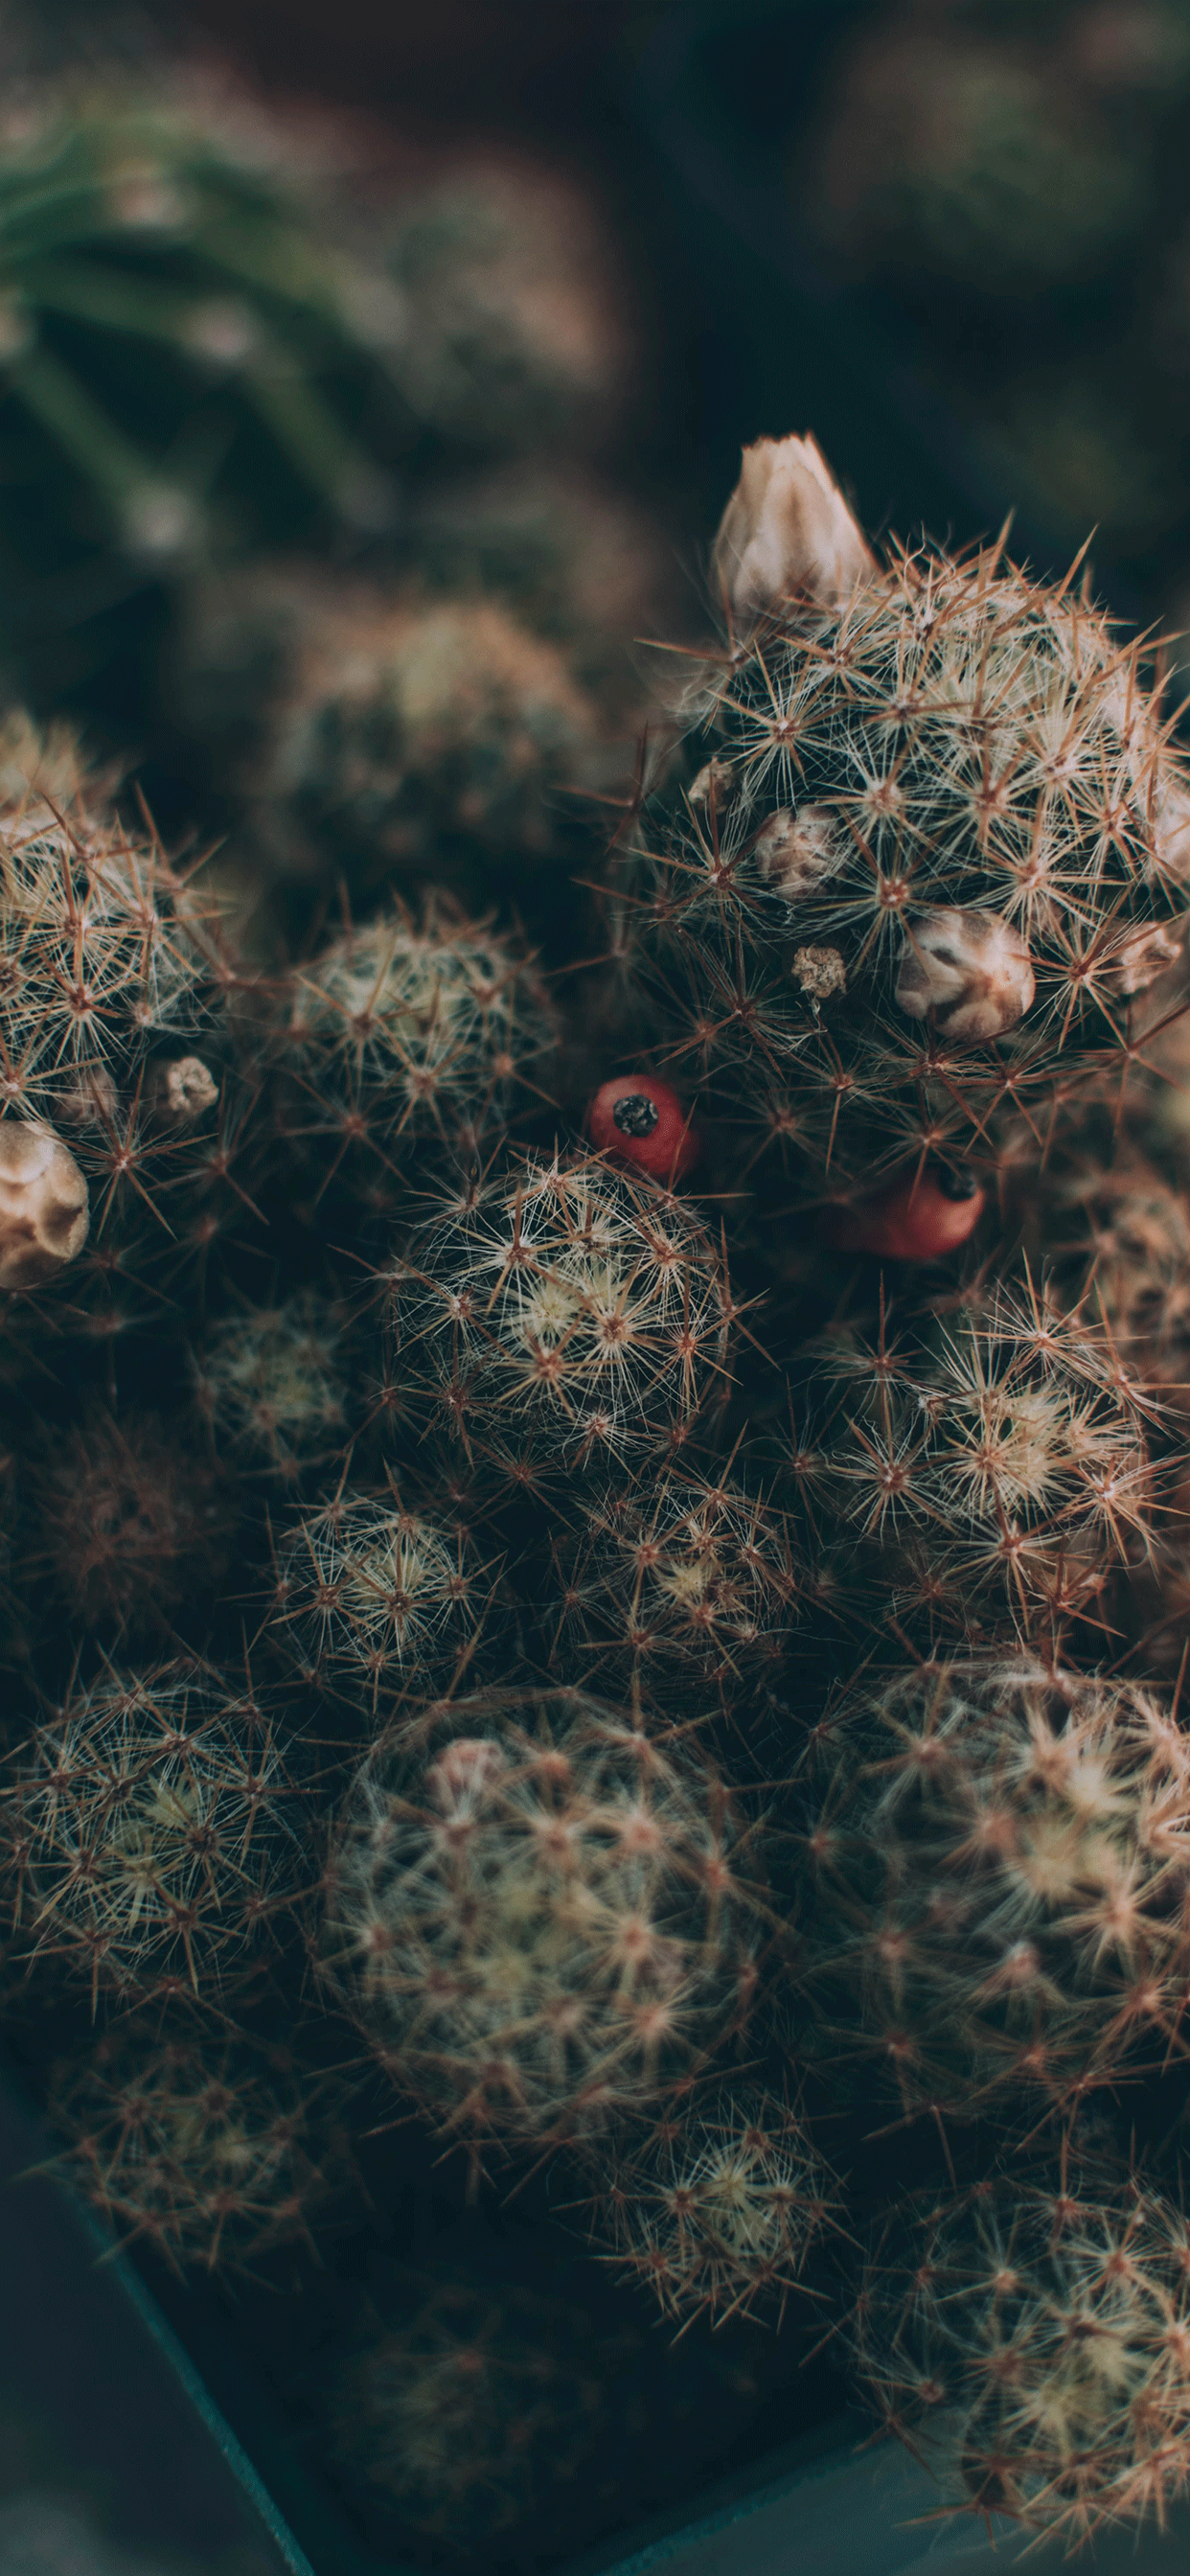 A cactus plant with many small plants - Cactus